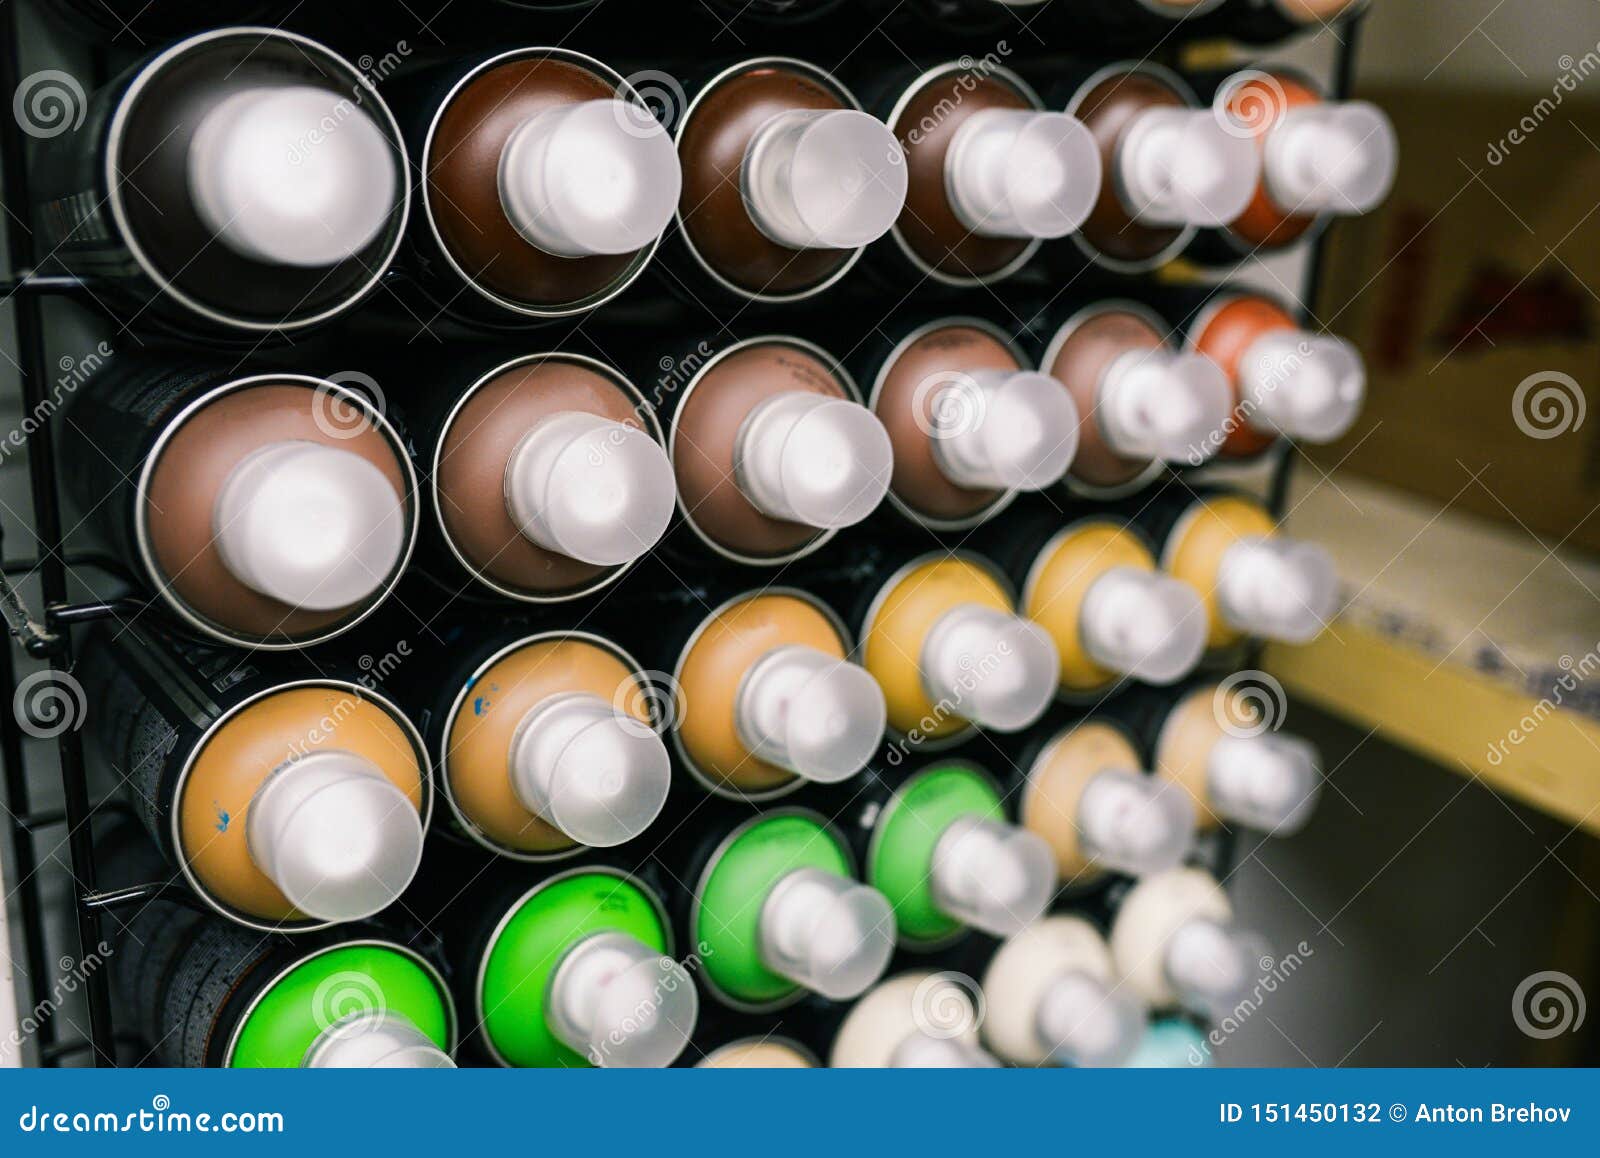 Spray Cans New Cans Of Paint For Graffiti Or Drawing Paint Sales In The Store Creativity And Art Stock Photo Image Of Design Paint 151450132